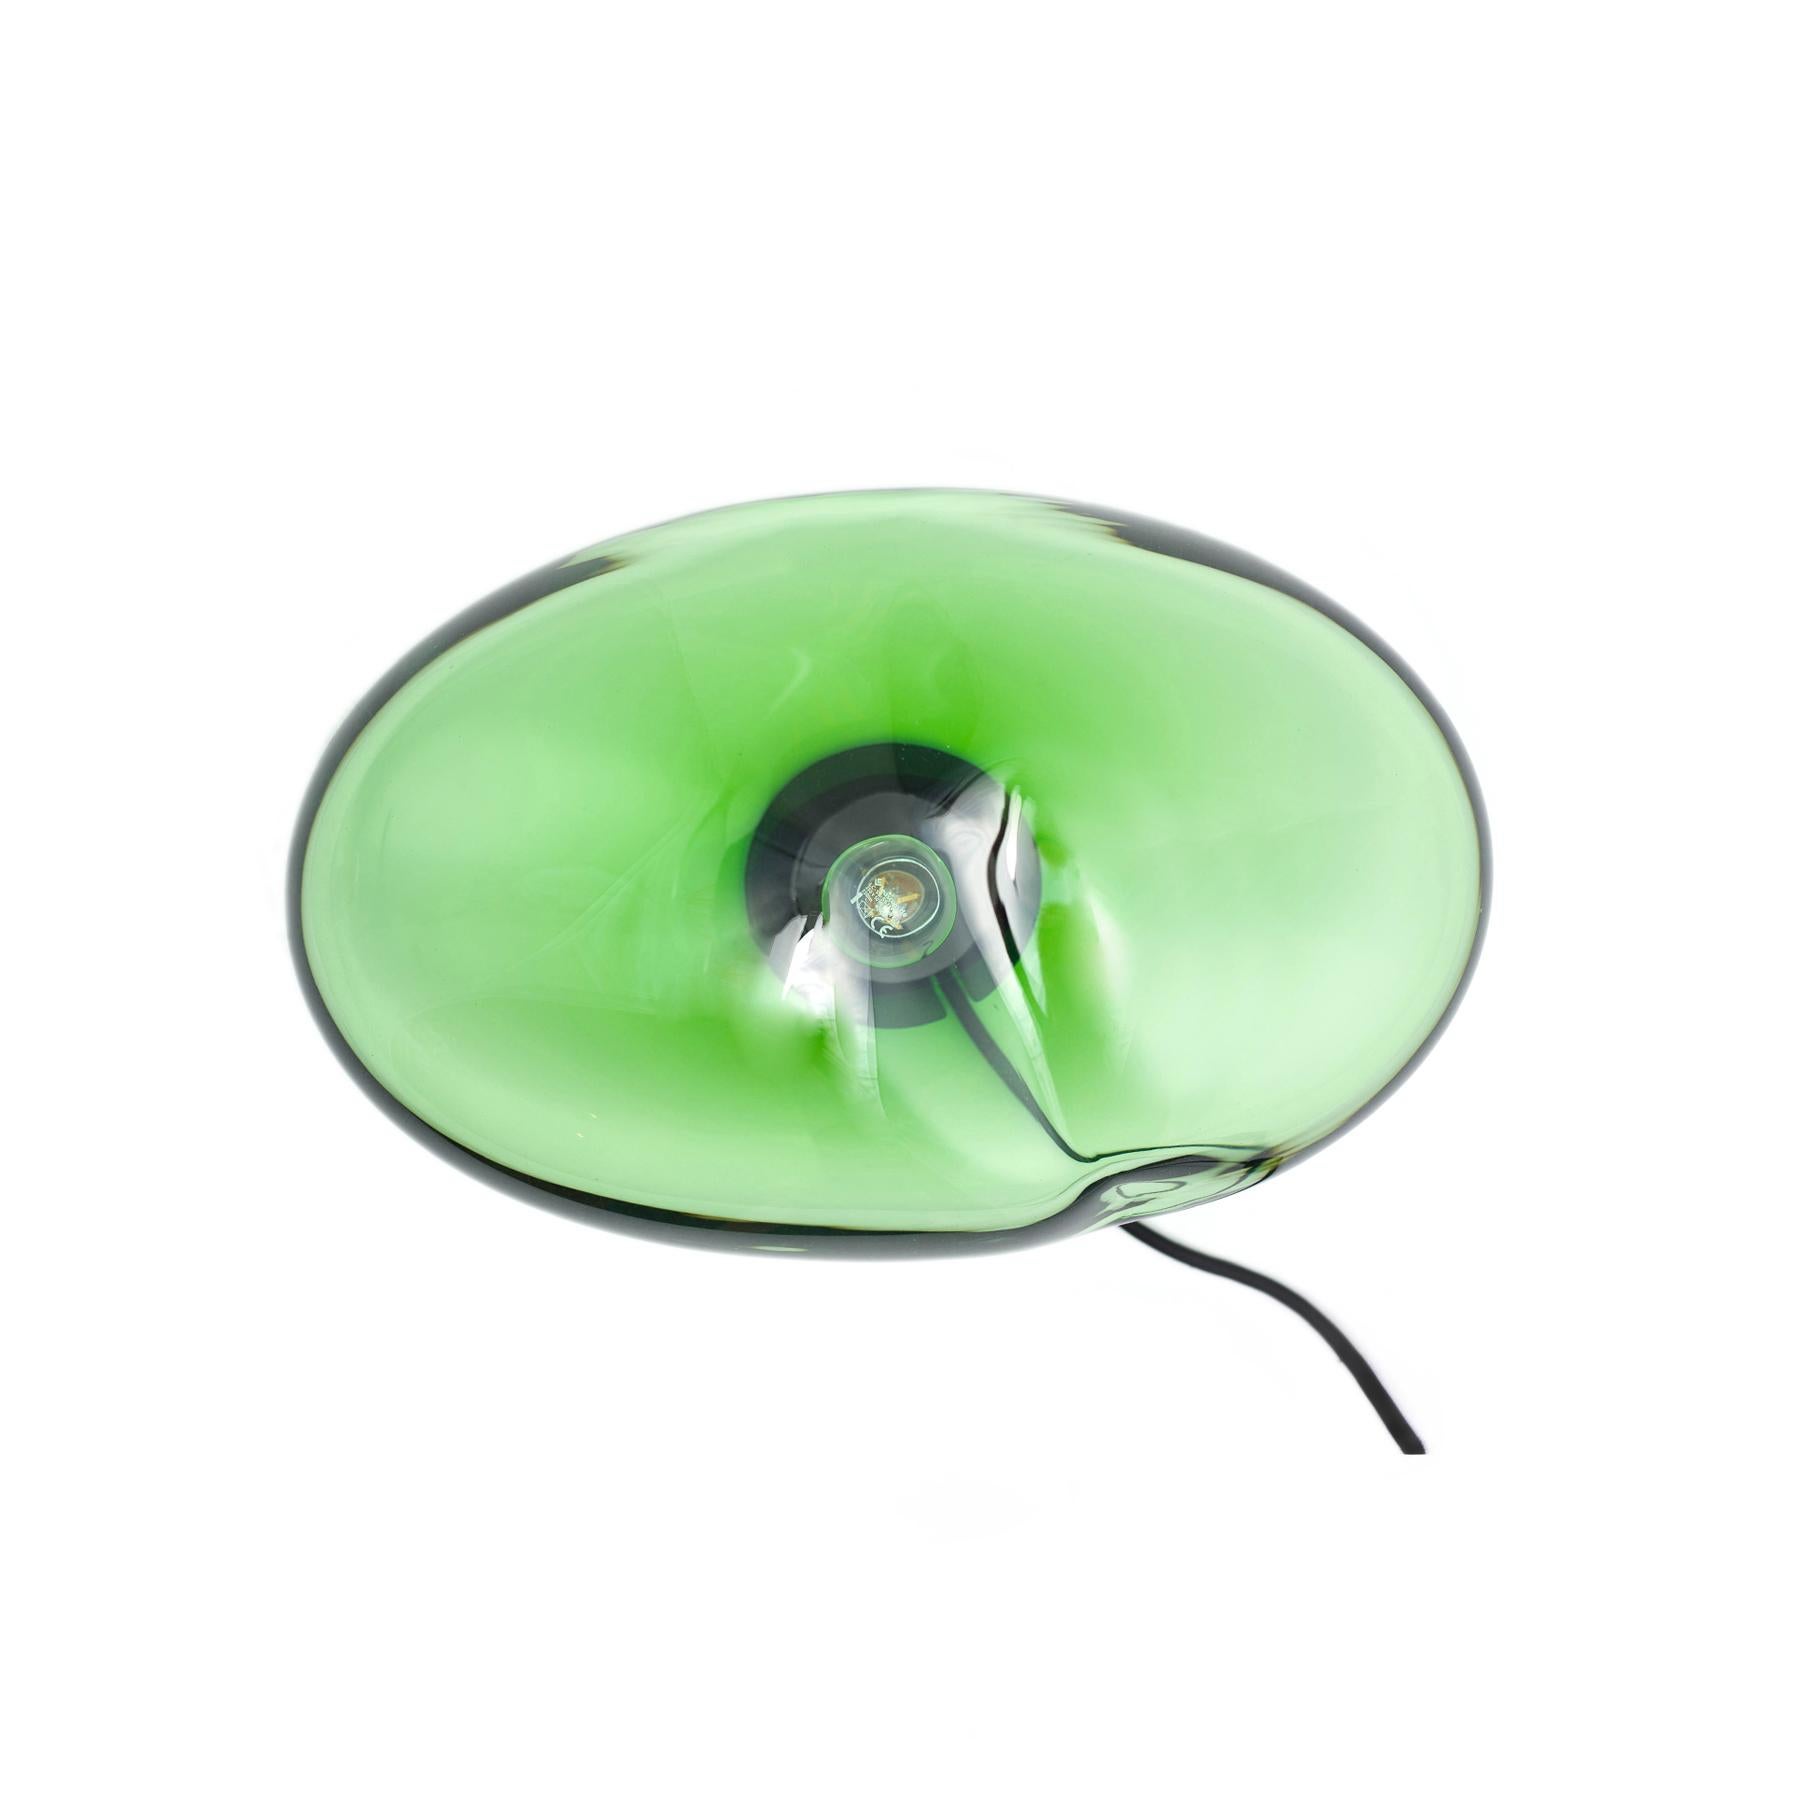 Contemporary Set of 2 Planetoide Green Iridescent Pendants by Eloa For Sale